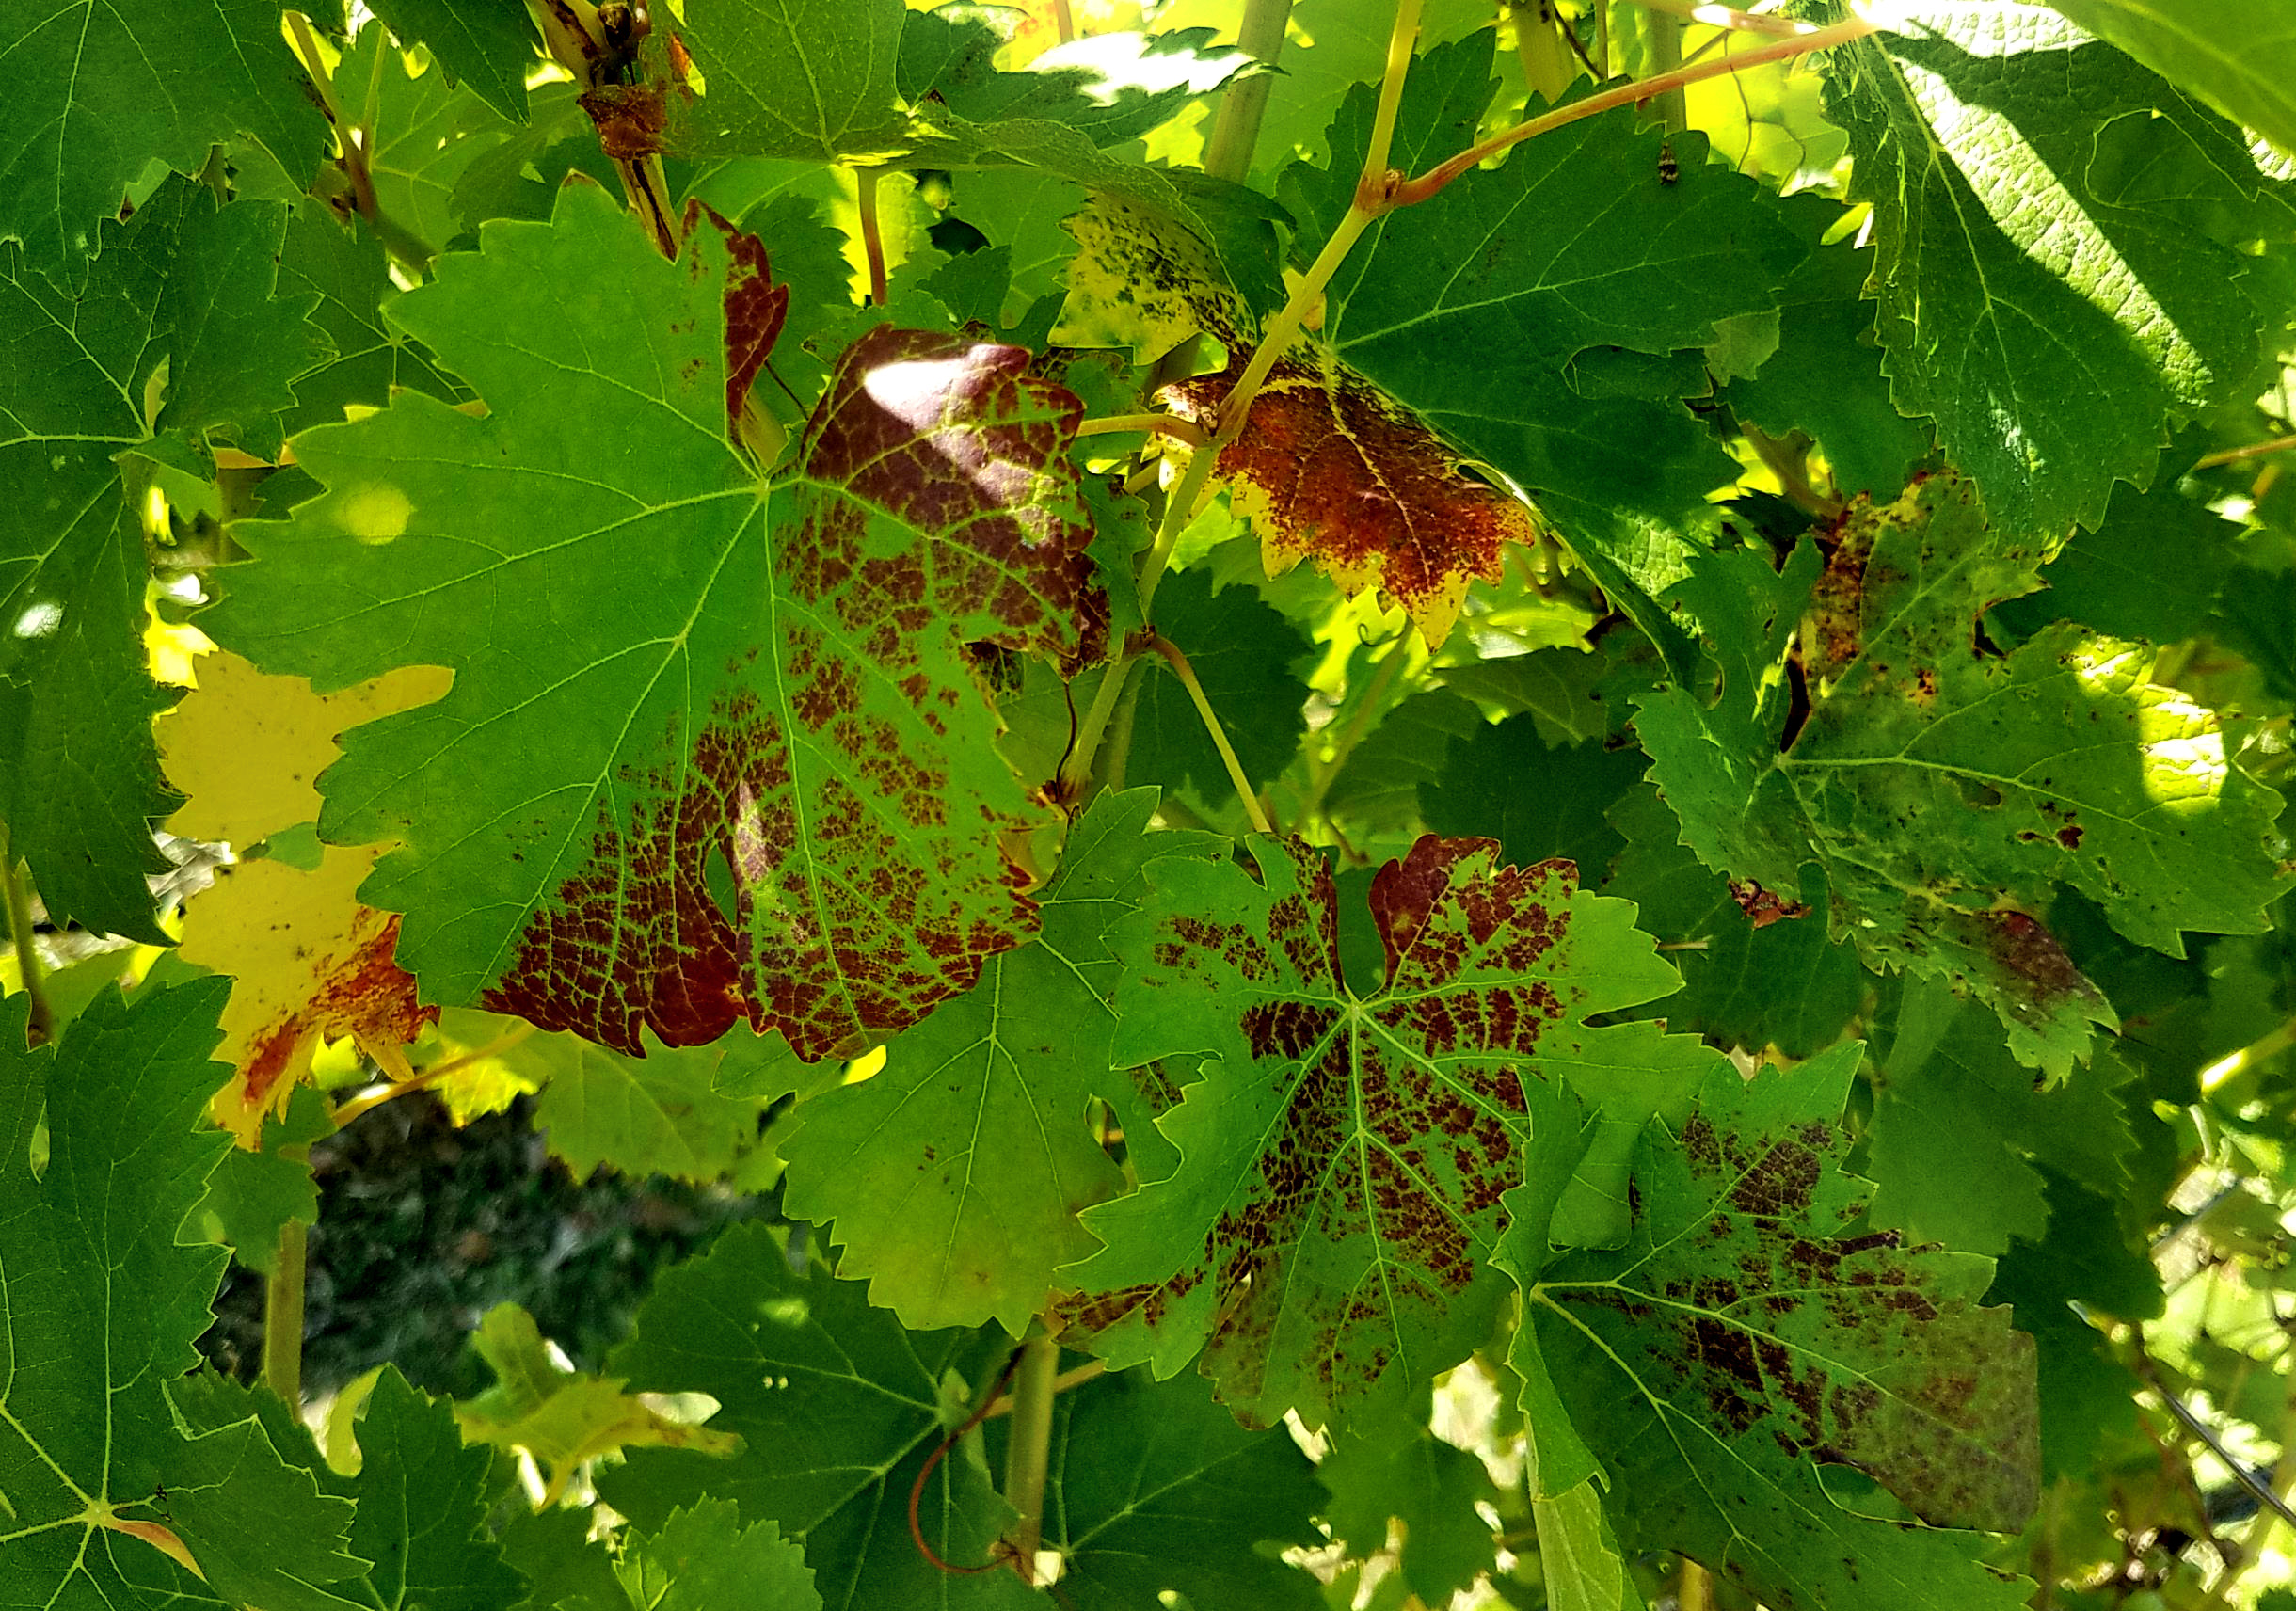 Symptoms of a grapevine leafroll virus